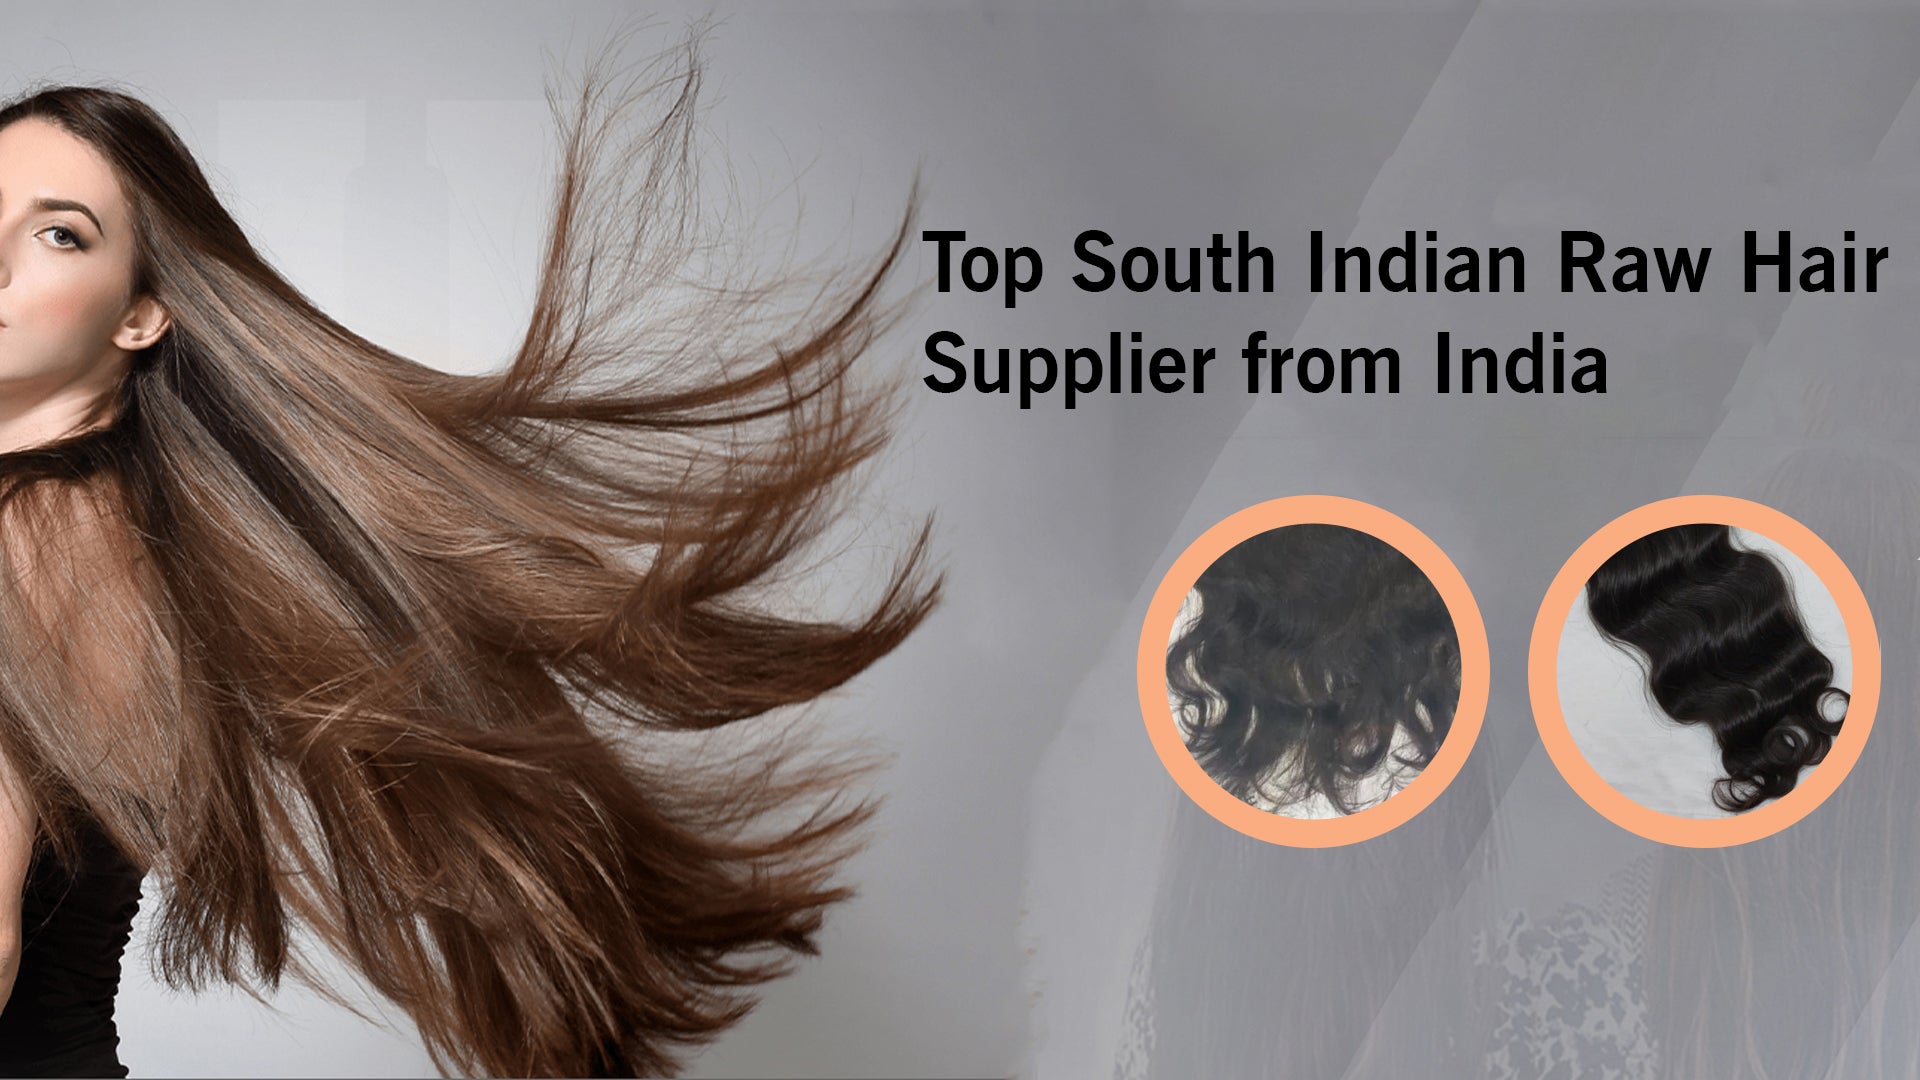 Top South Indian Raw Hair Supplier from India